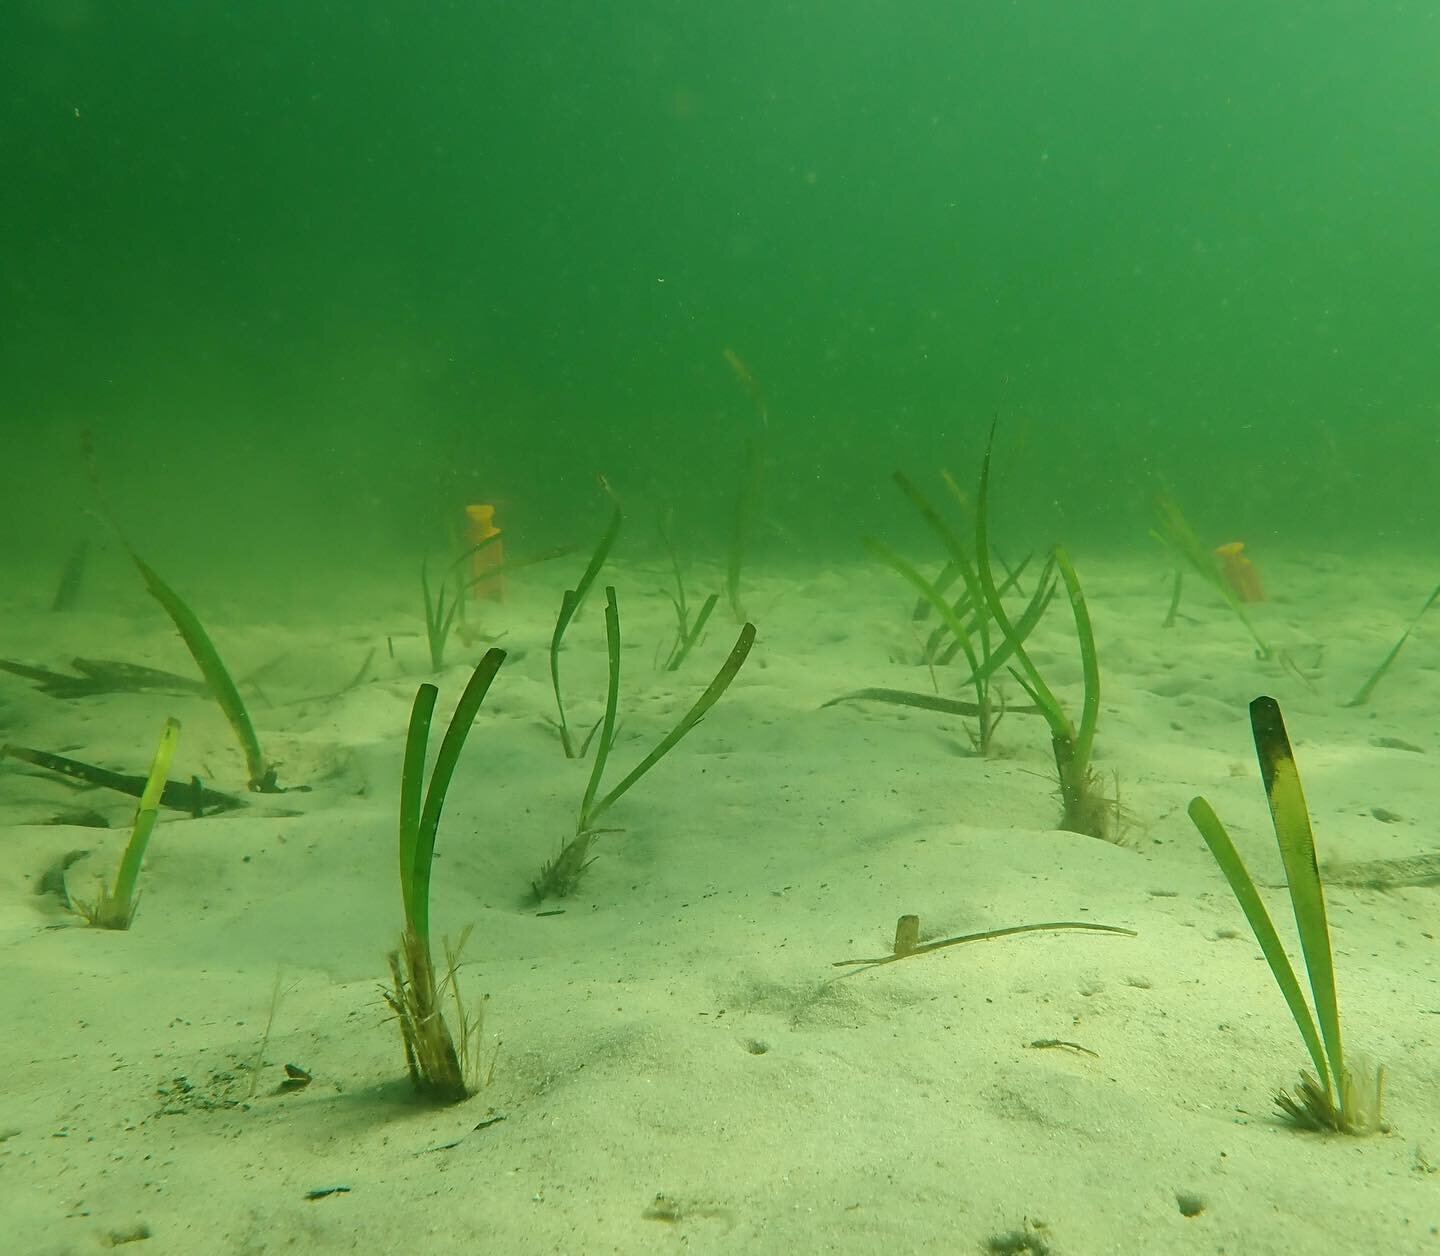 Planting is underway in Lake Macquarie thanks to our awesome citizen scientists 💪🏻 so far we have planted 300 storm-detached fragments of Posidonia across 2 mooring scars 
@ozfishunlimited @ourlakemac @unswscience @syd_marine_science